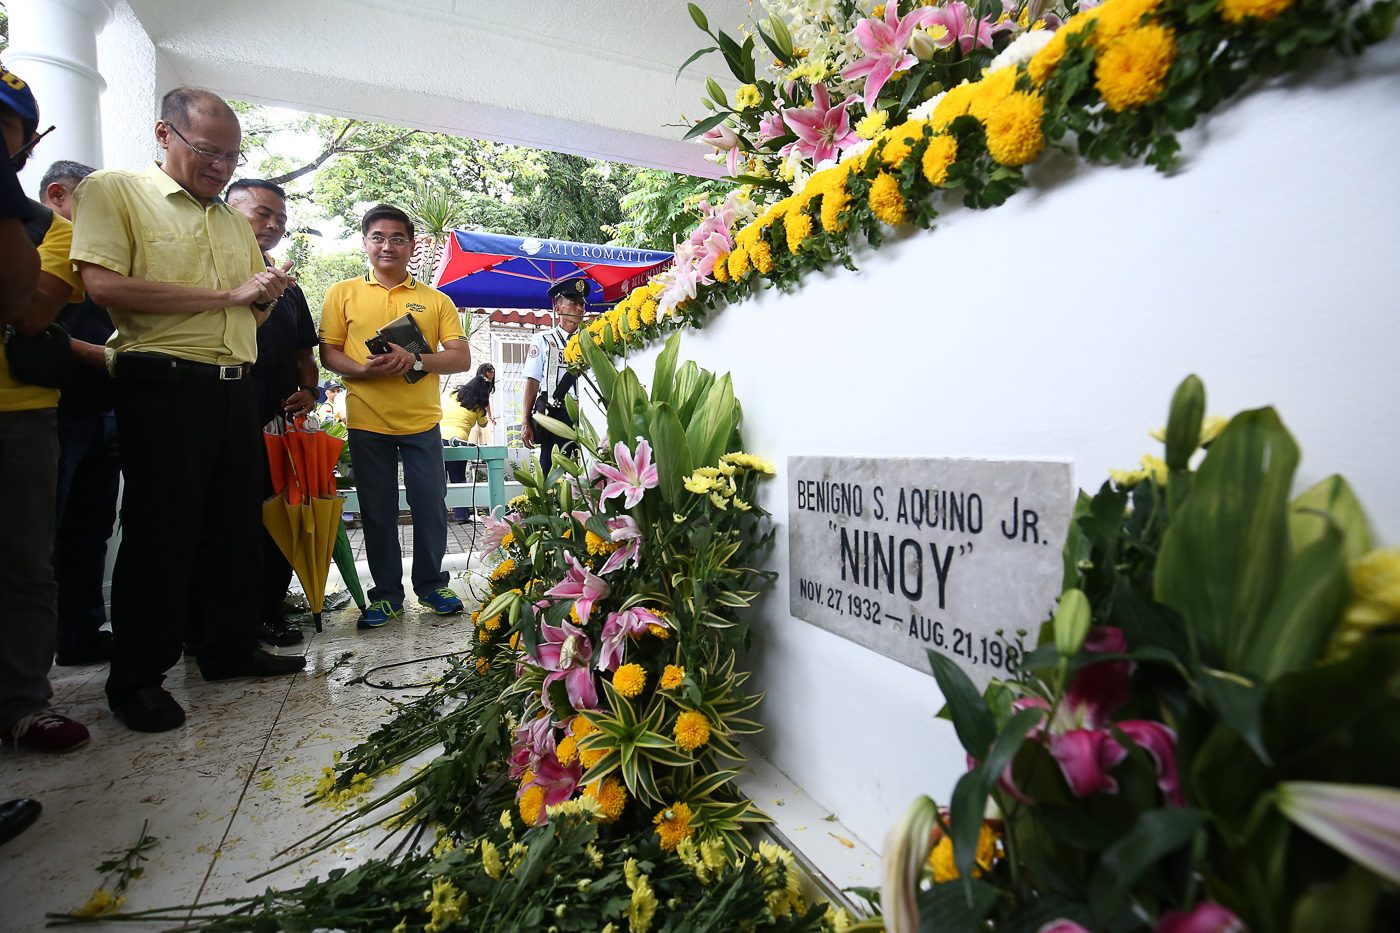 Aquino to Duterte: Reflect on your message about Ninoy